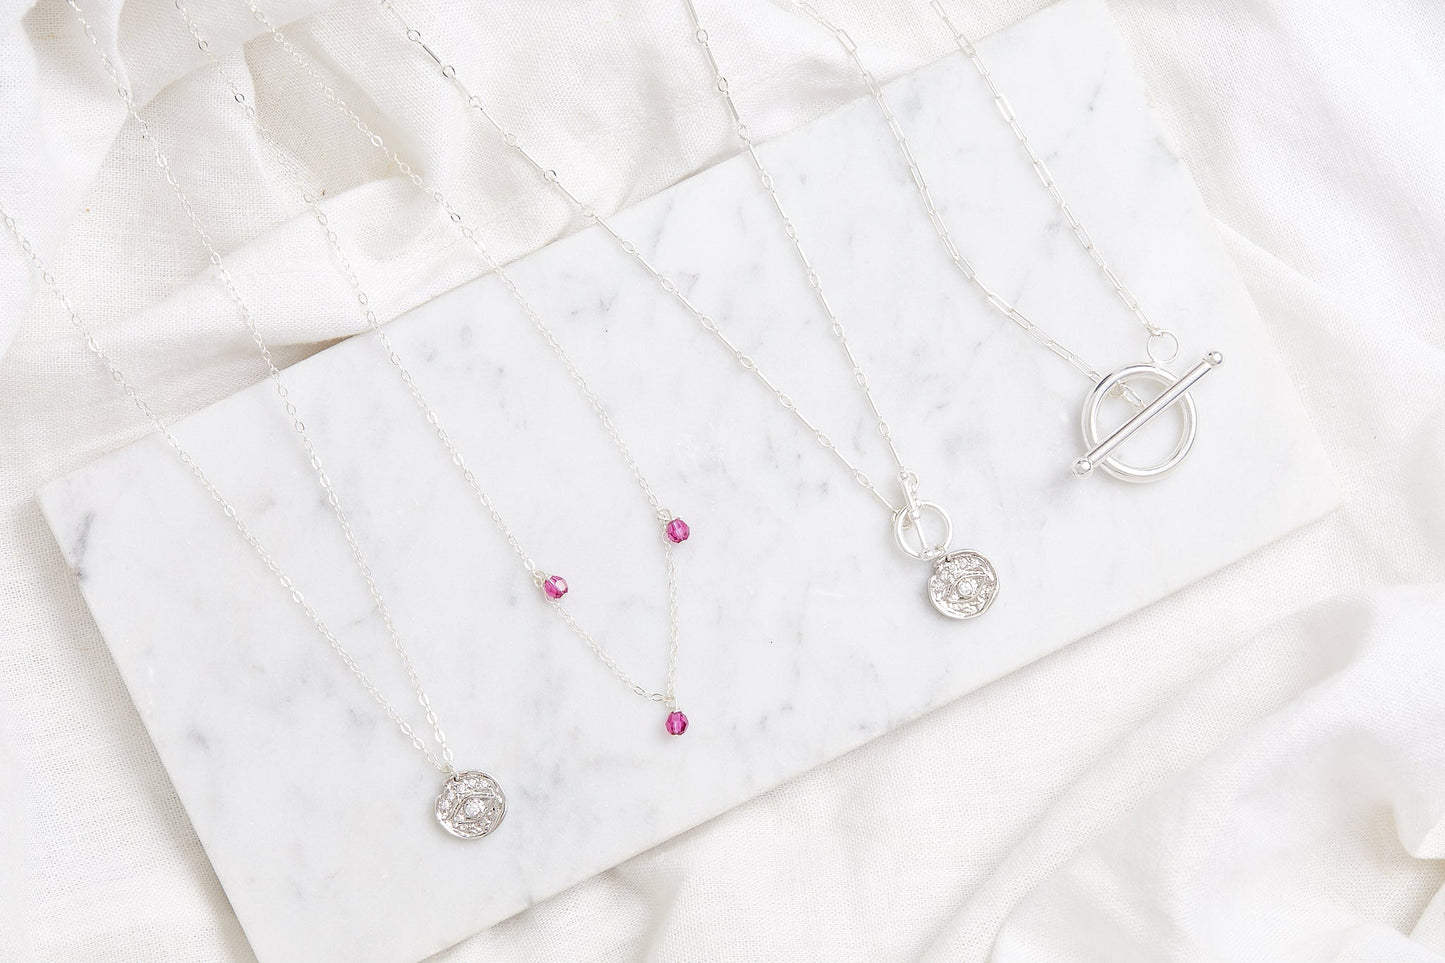 The Birthstone Necklace